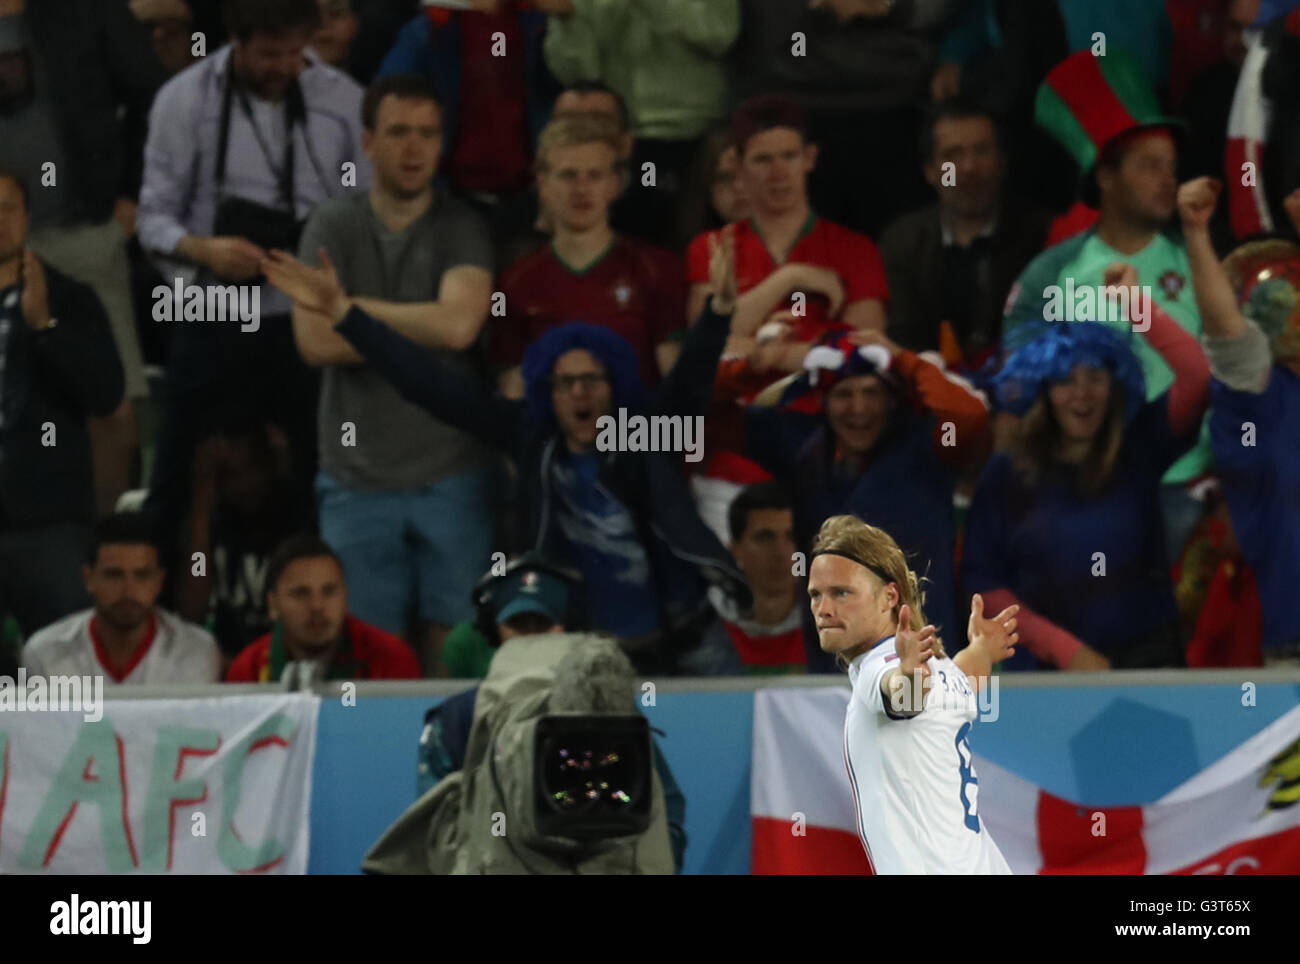 Saint Etienne, France. 14th June, 2016. Birkir Bjarnason of Iceland celebrates after scoring during the Euro 2016 Group F soccer match between Portugal and Iceland in Saint-Etienne, France, June 14, 2016. Credit:  Xinhua/Alamy Live News Stock Photo